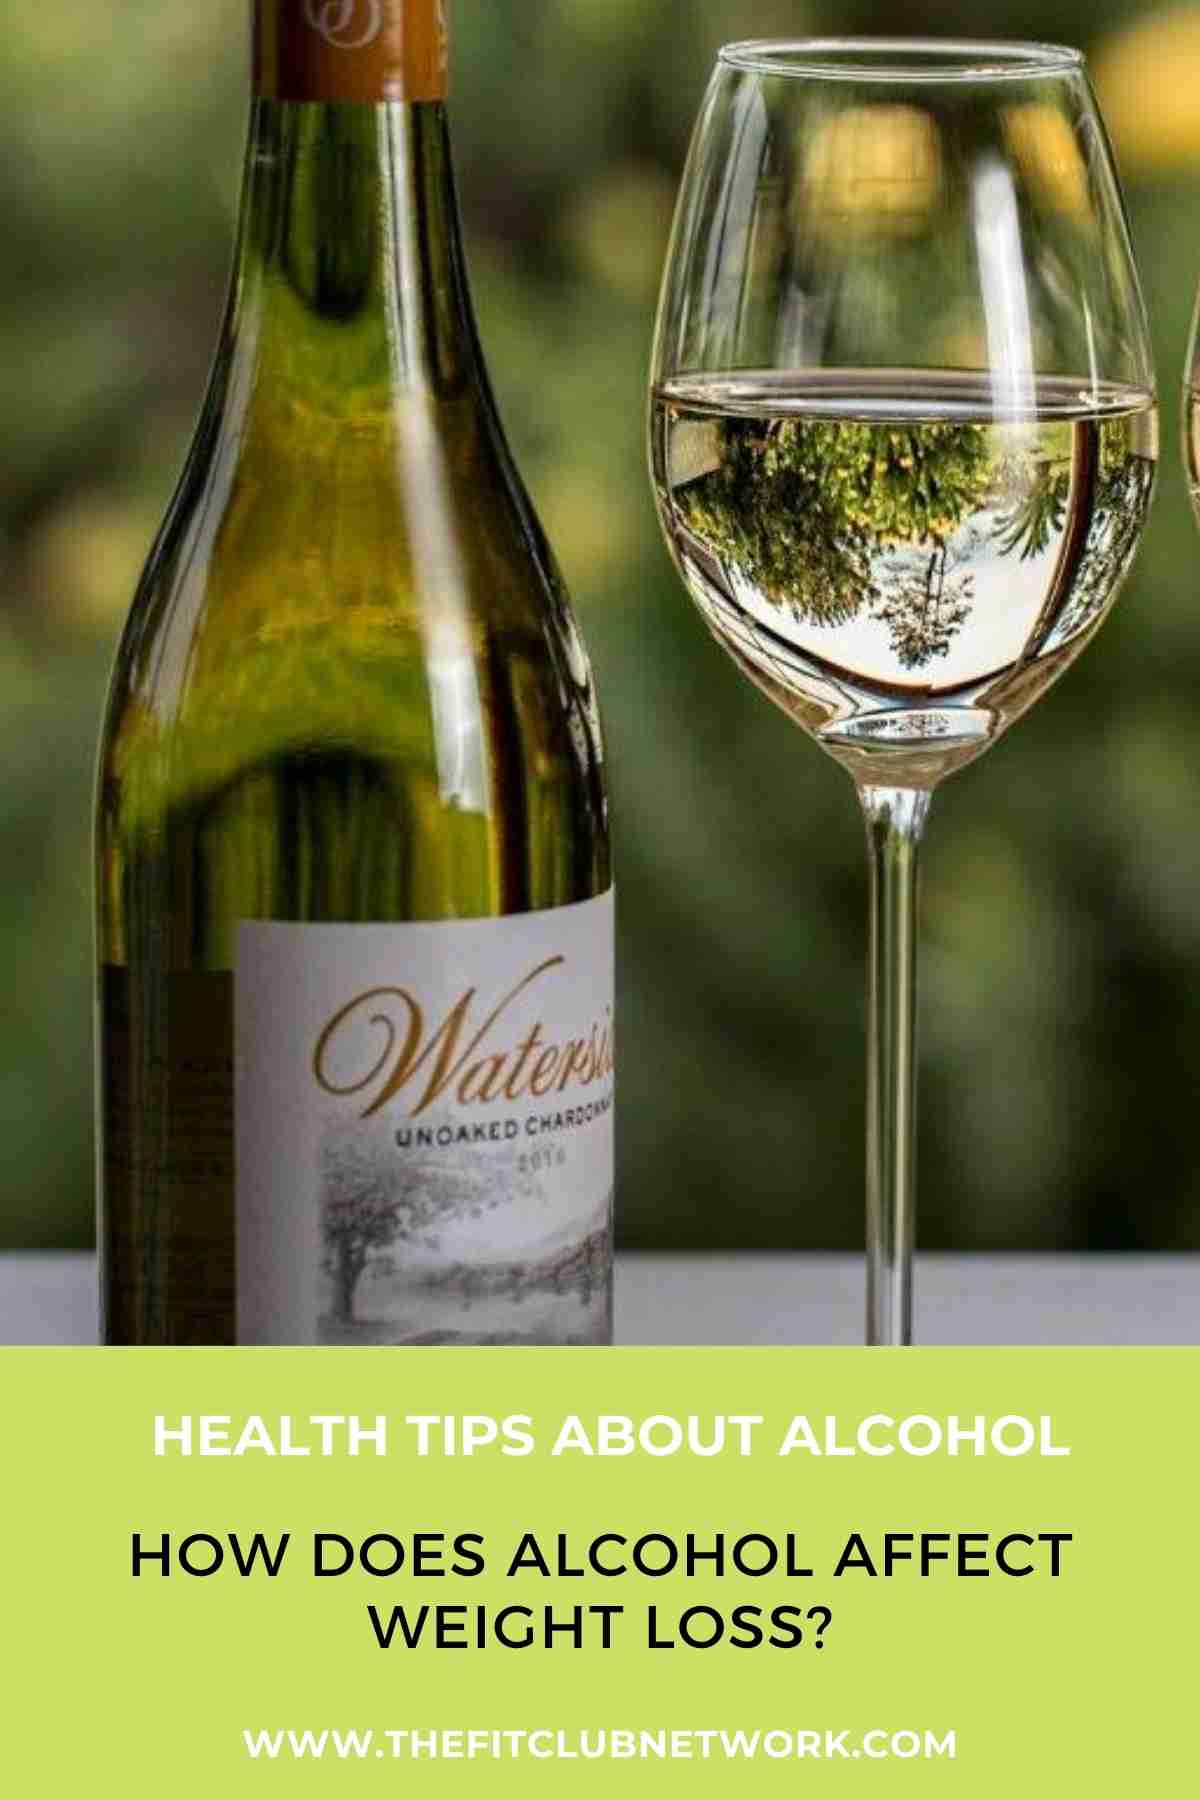 How Does Alcohol Affect Weight Loss?